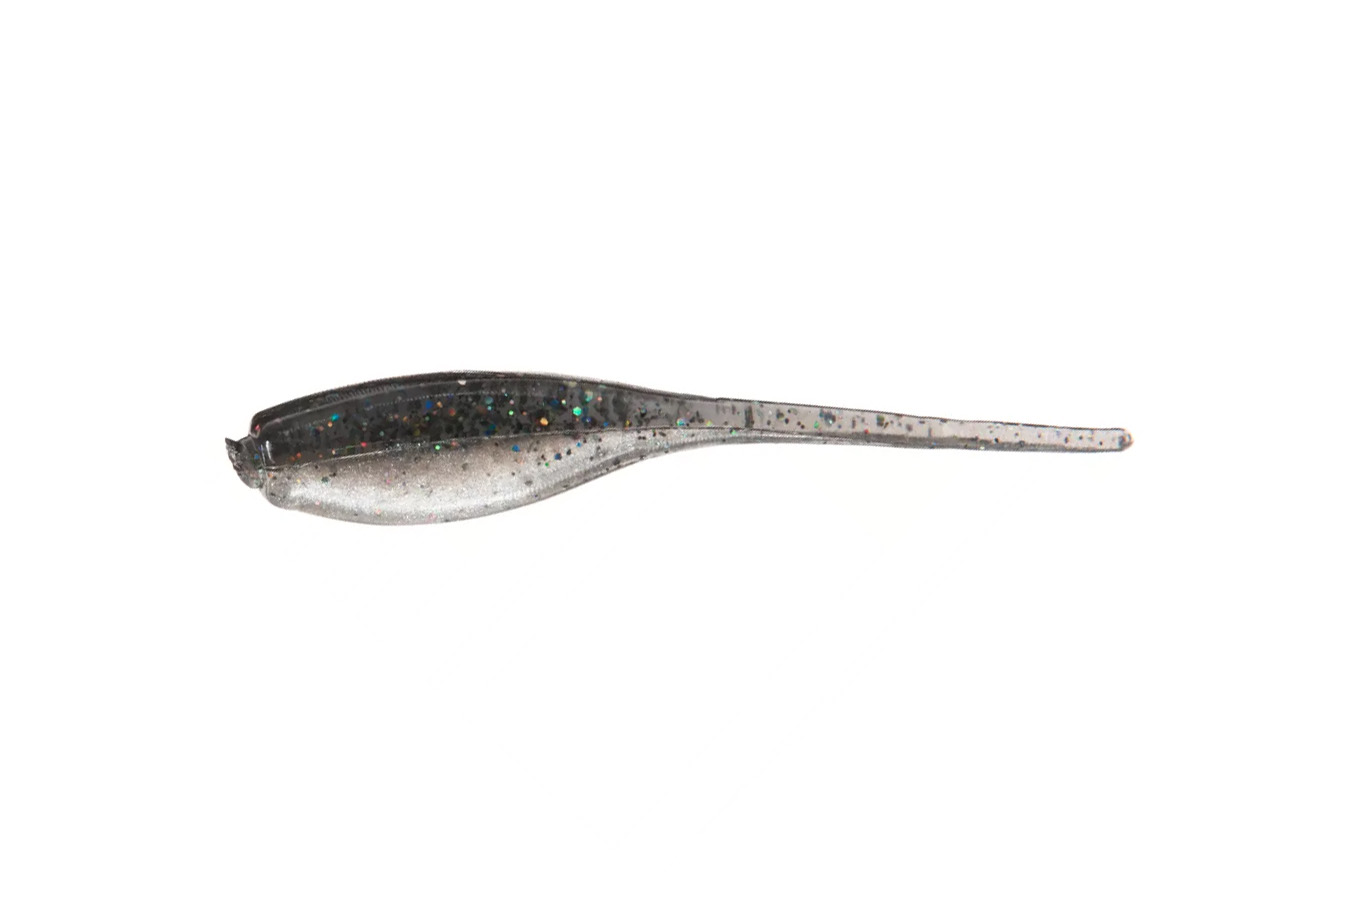 Discount Bobby Garland Baby Shad 2 (Threadfin Shad) for Sale, Online  Fishing Baits Store